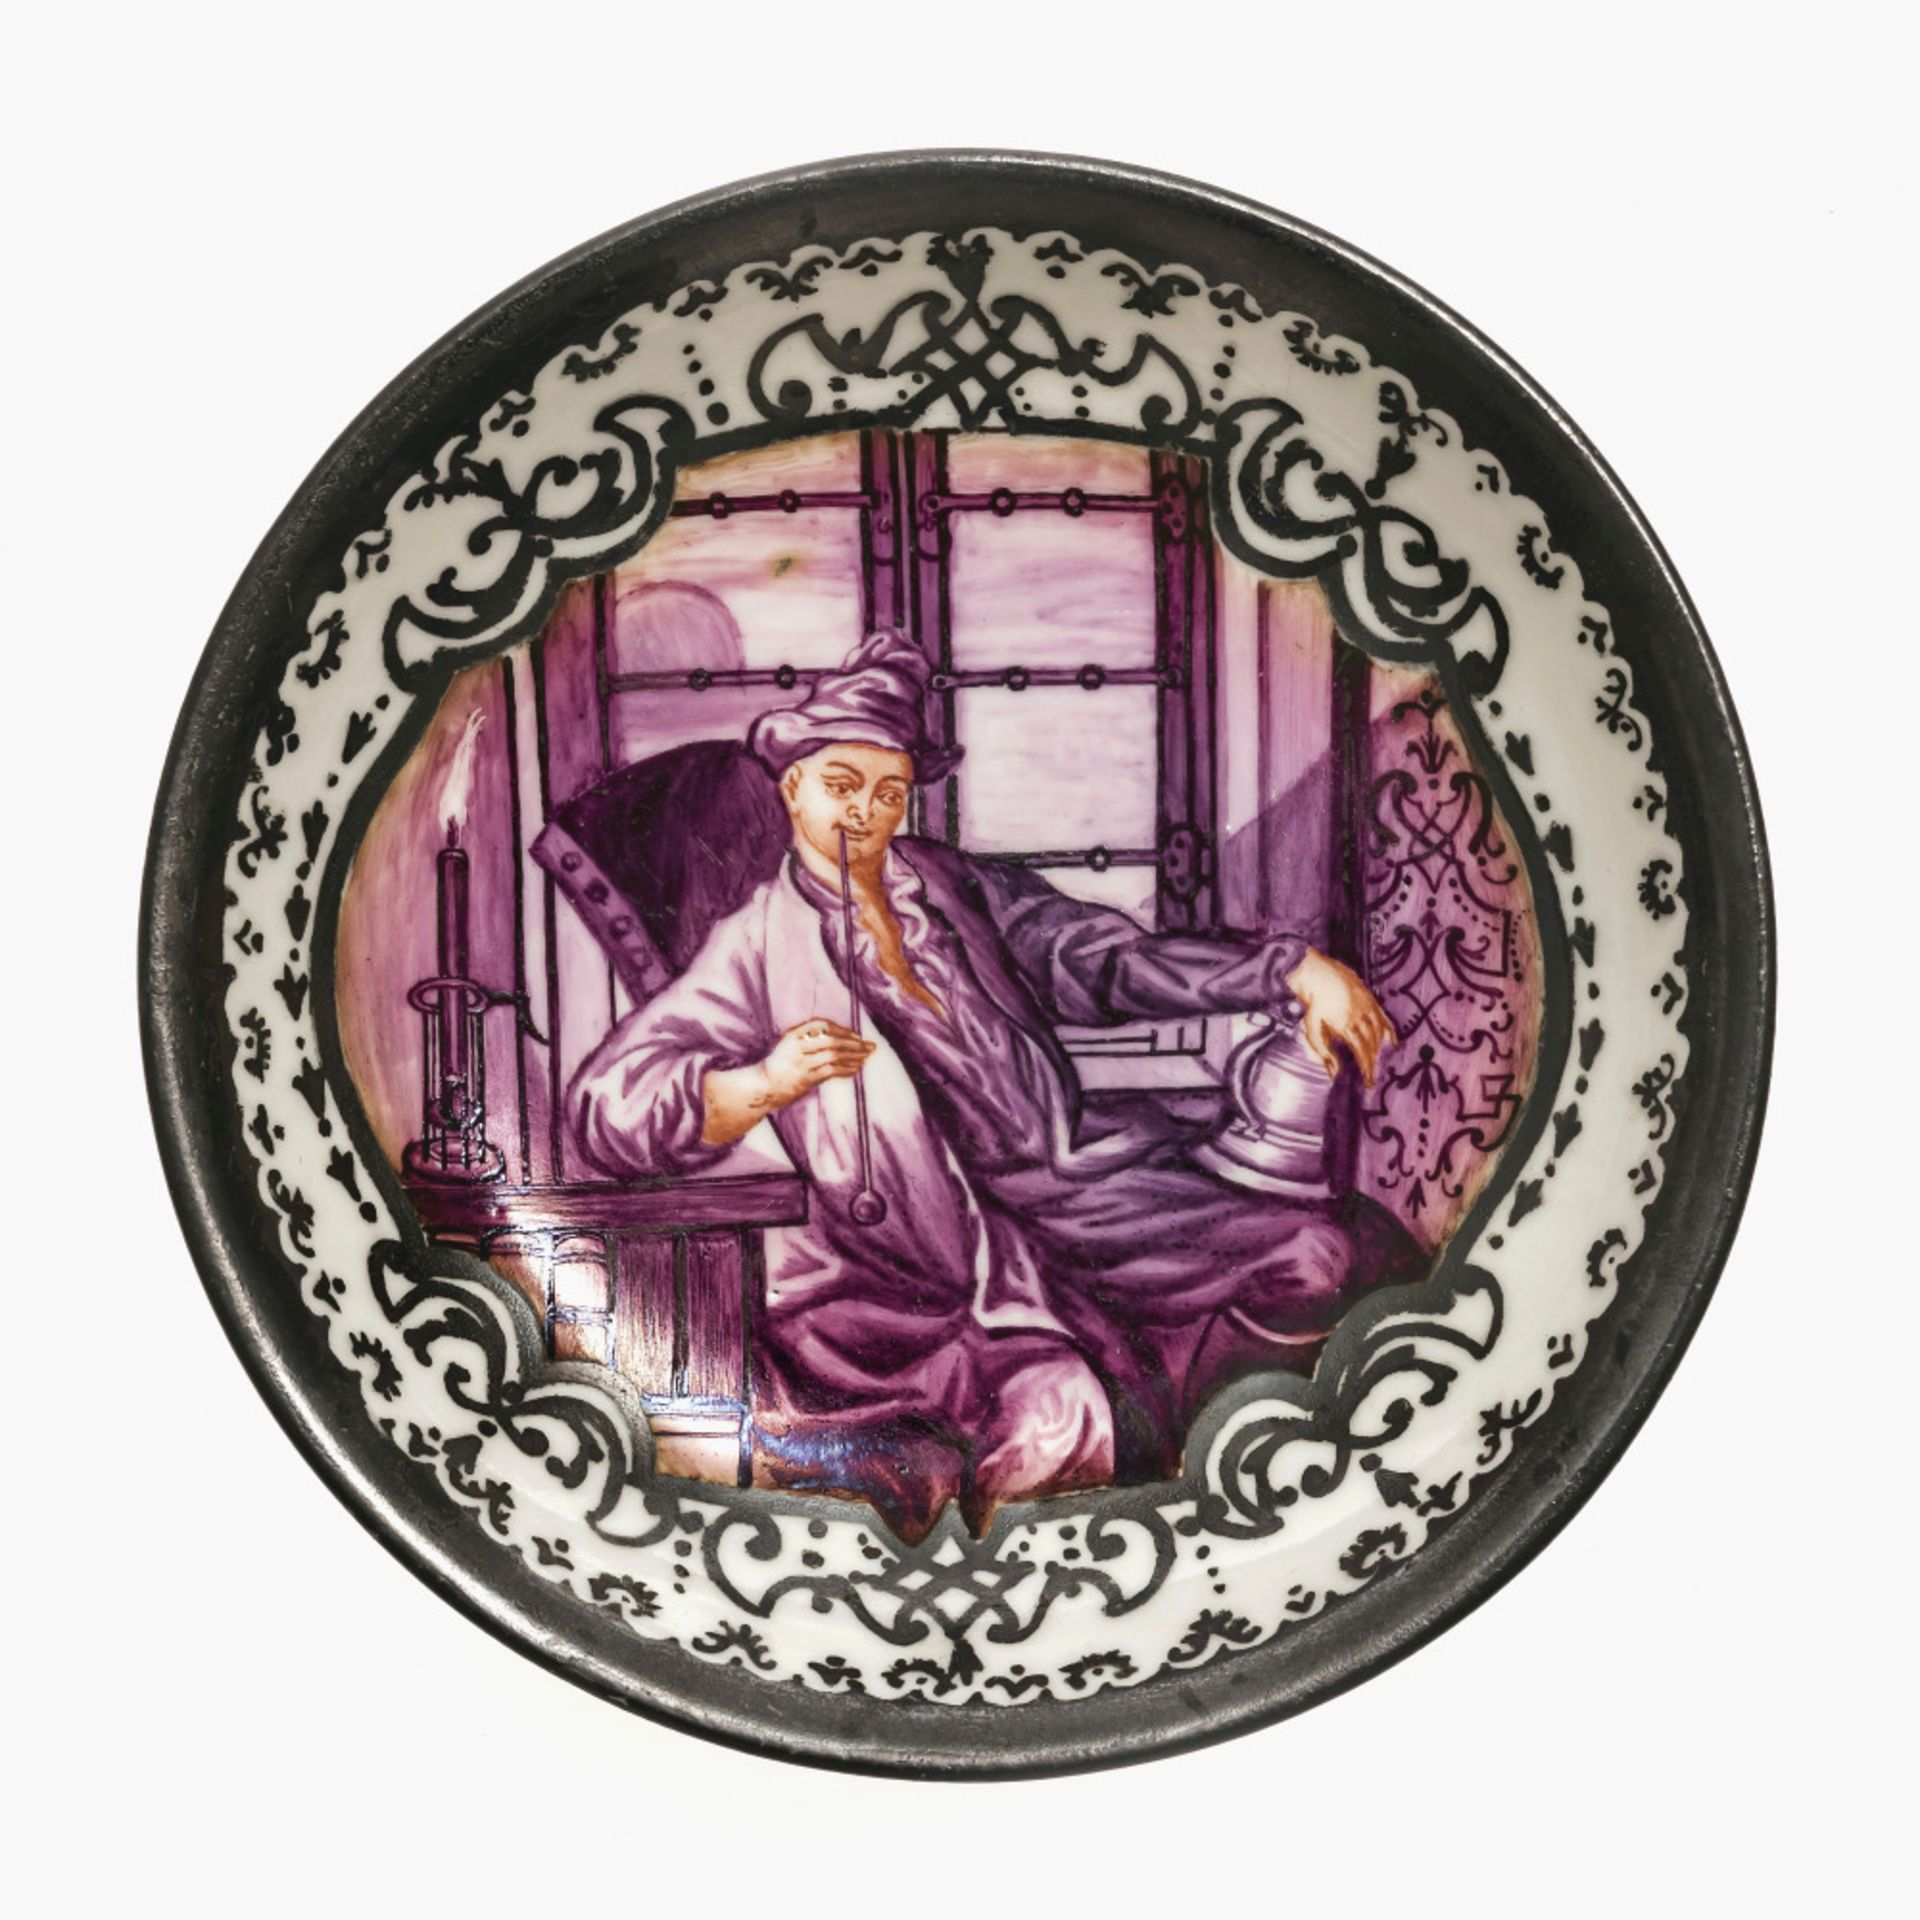 A Hausmaler saucer - Meissen, circa 1725, painting attributed to Abraham Seuter, Augsburg, 2nd quart